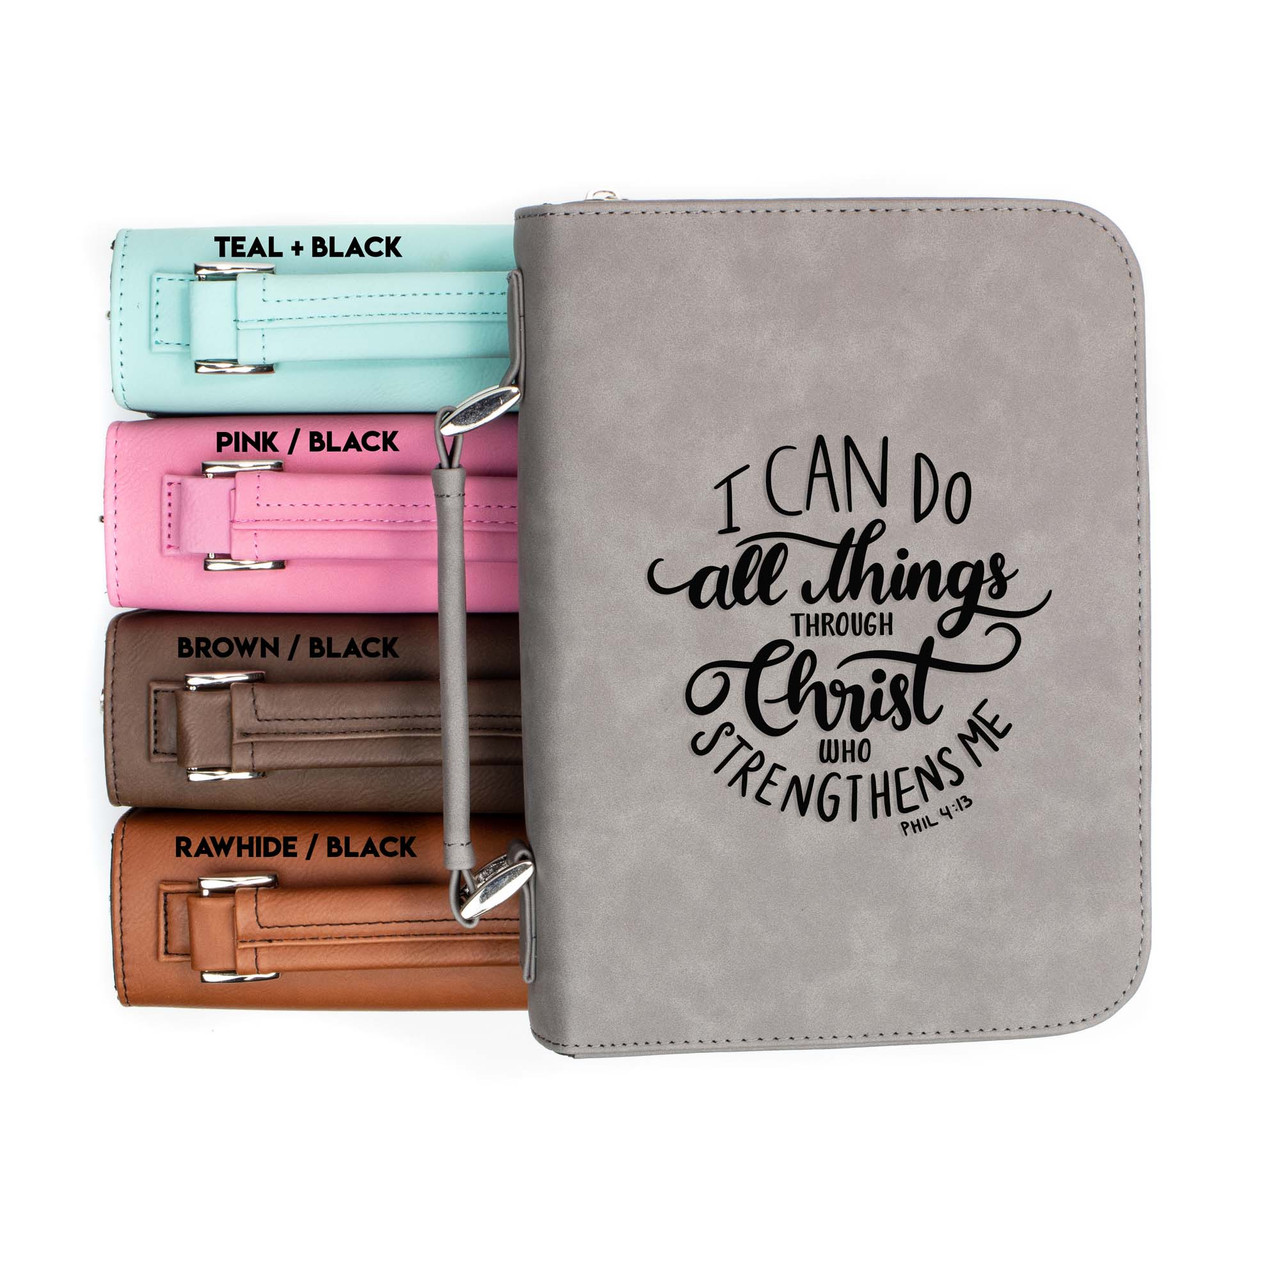 All Things Through Christ Philippians 4-13 Faux Leather Bible Cover